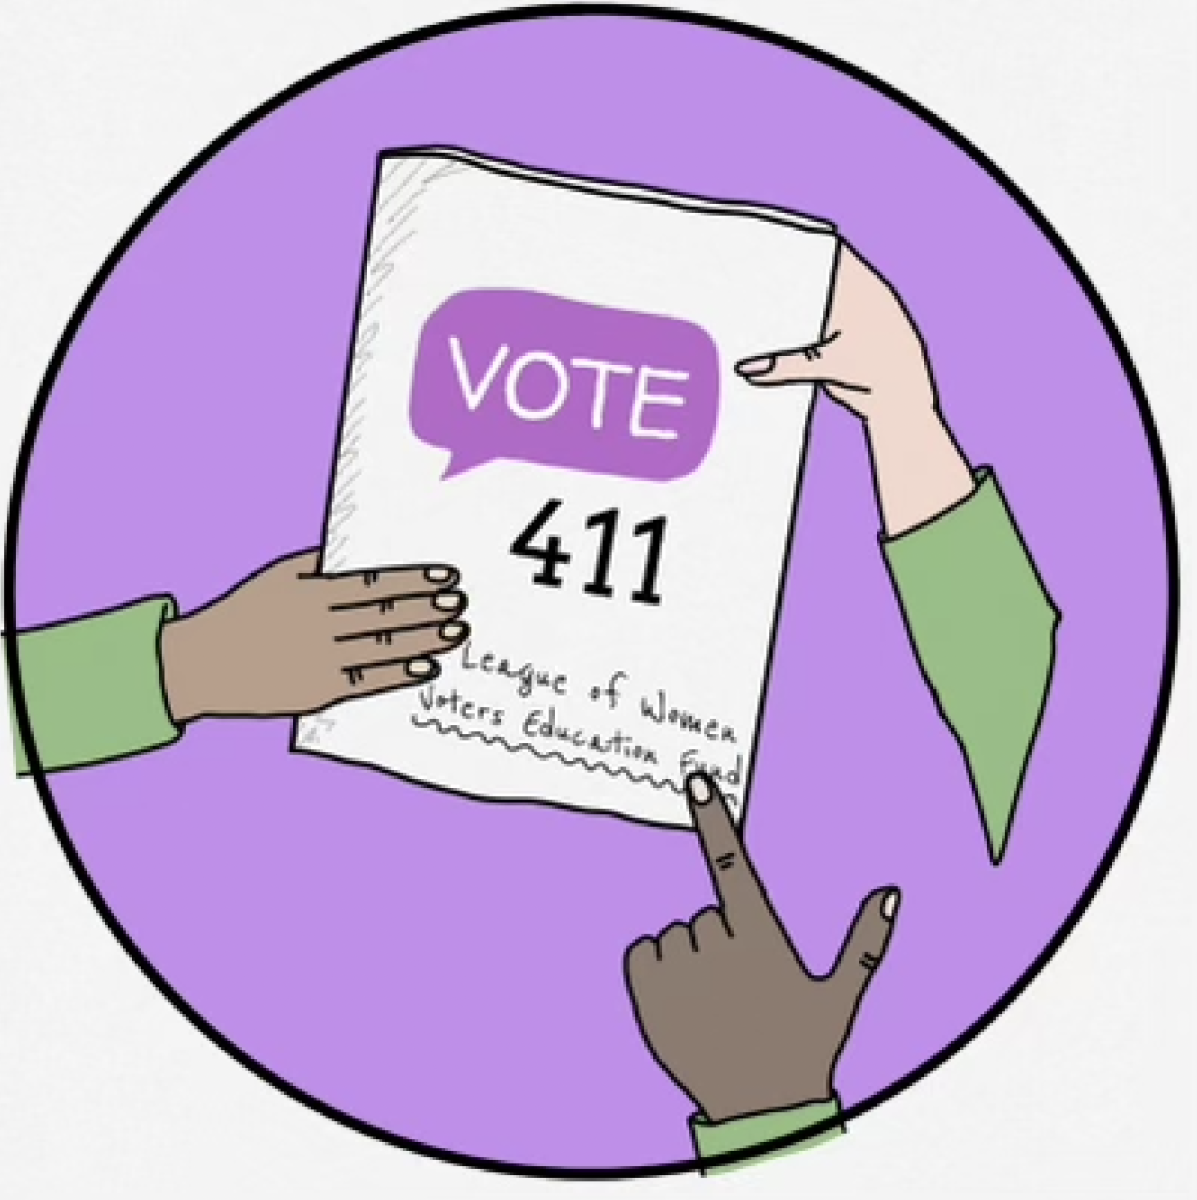 Vote411%3A+A+new+voter+platform+in+California